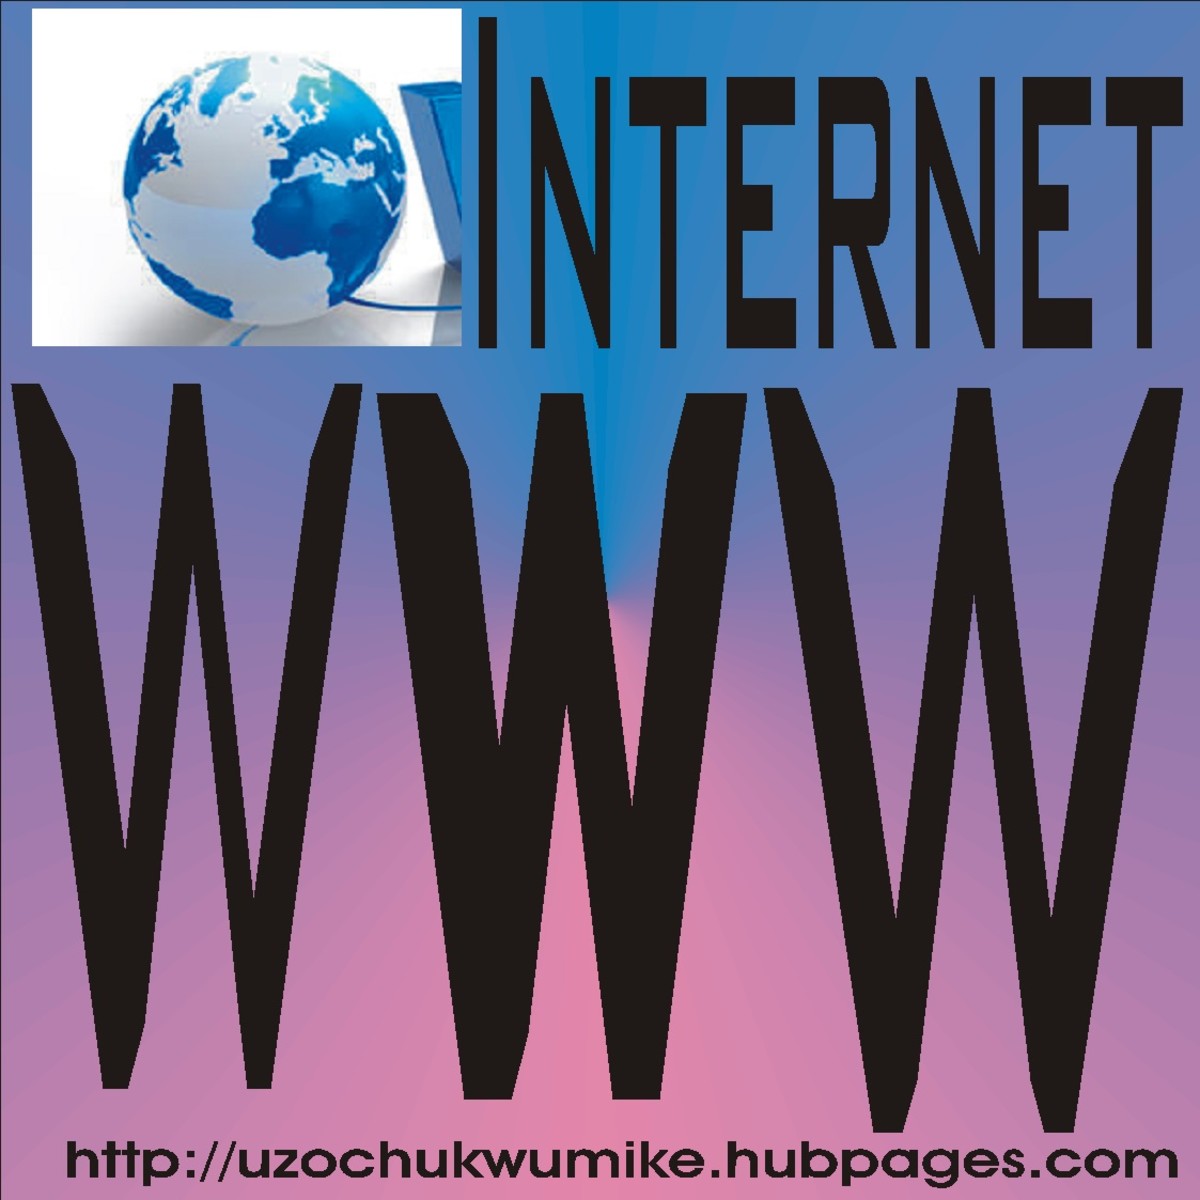 Most websites start with www. The www means world Wide Web. 